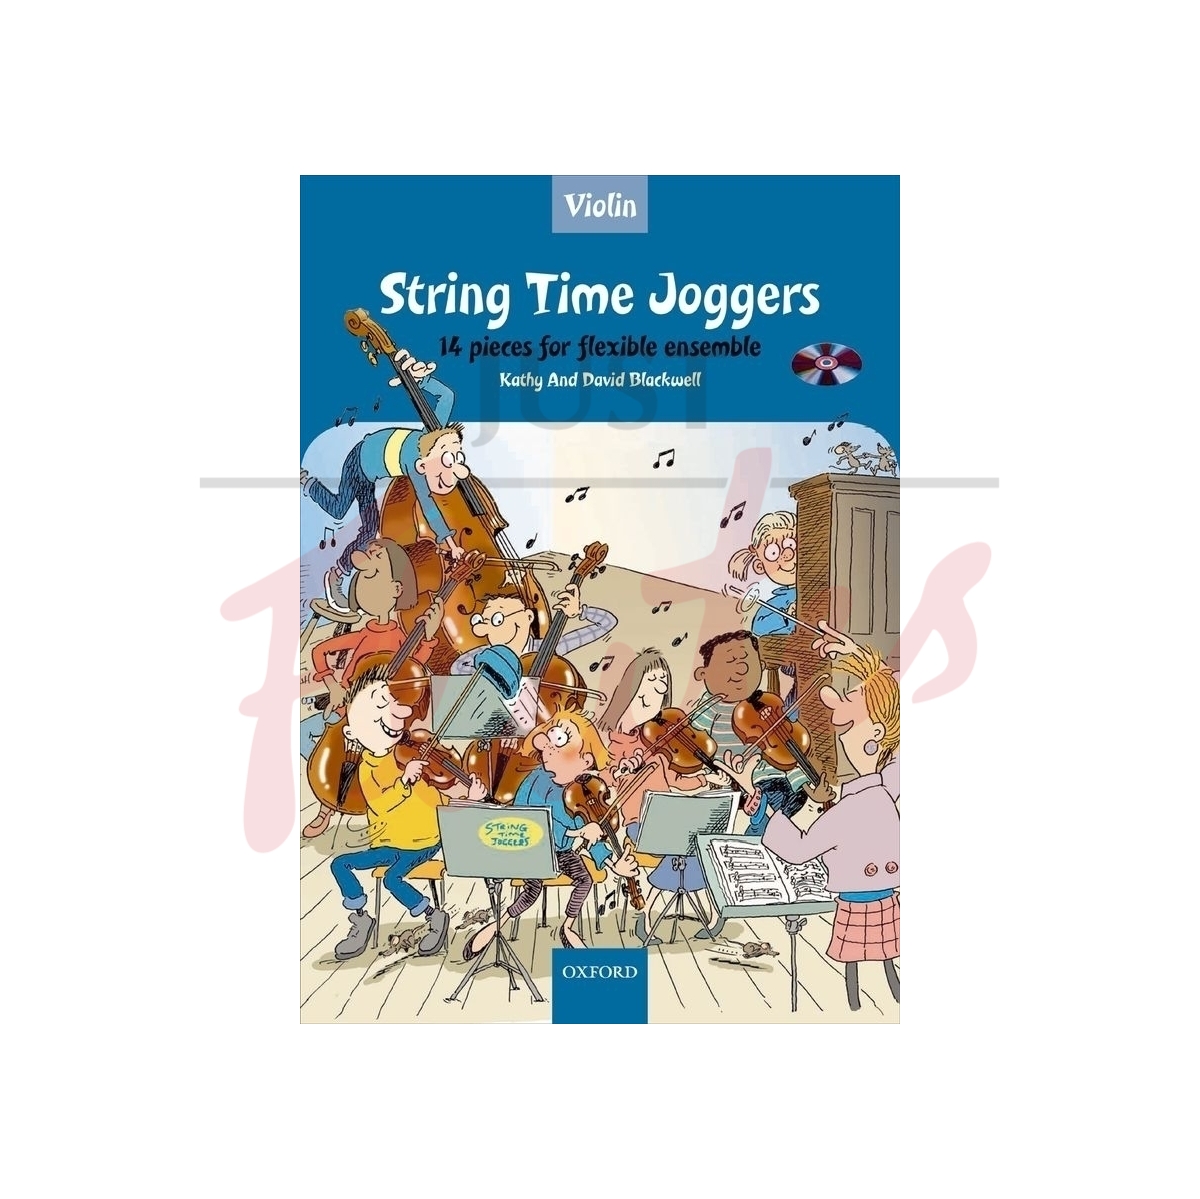 String Time Joggers [Violin]